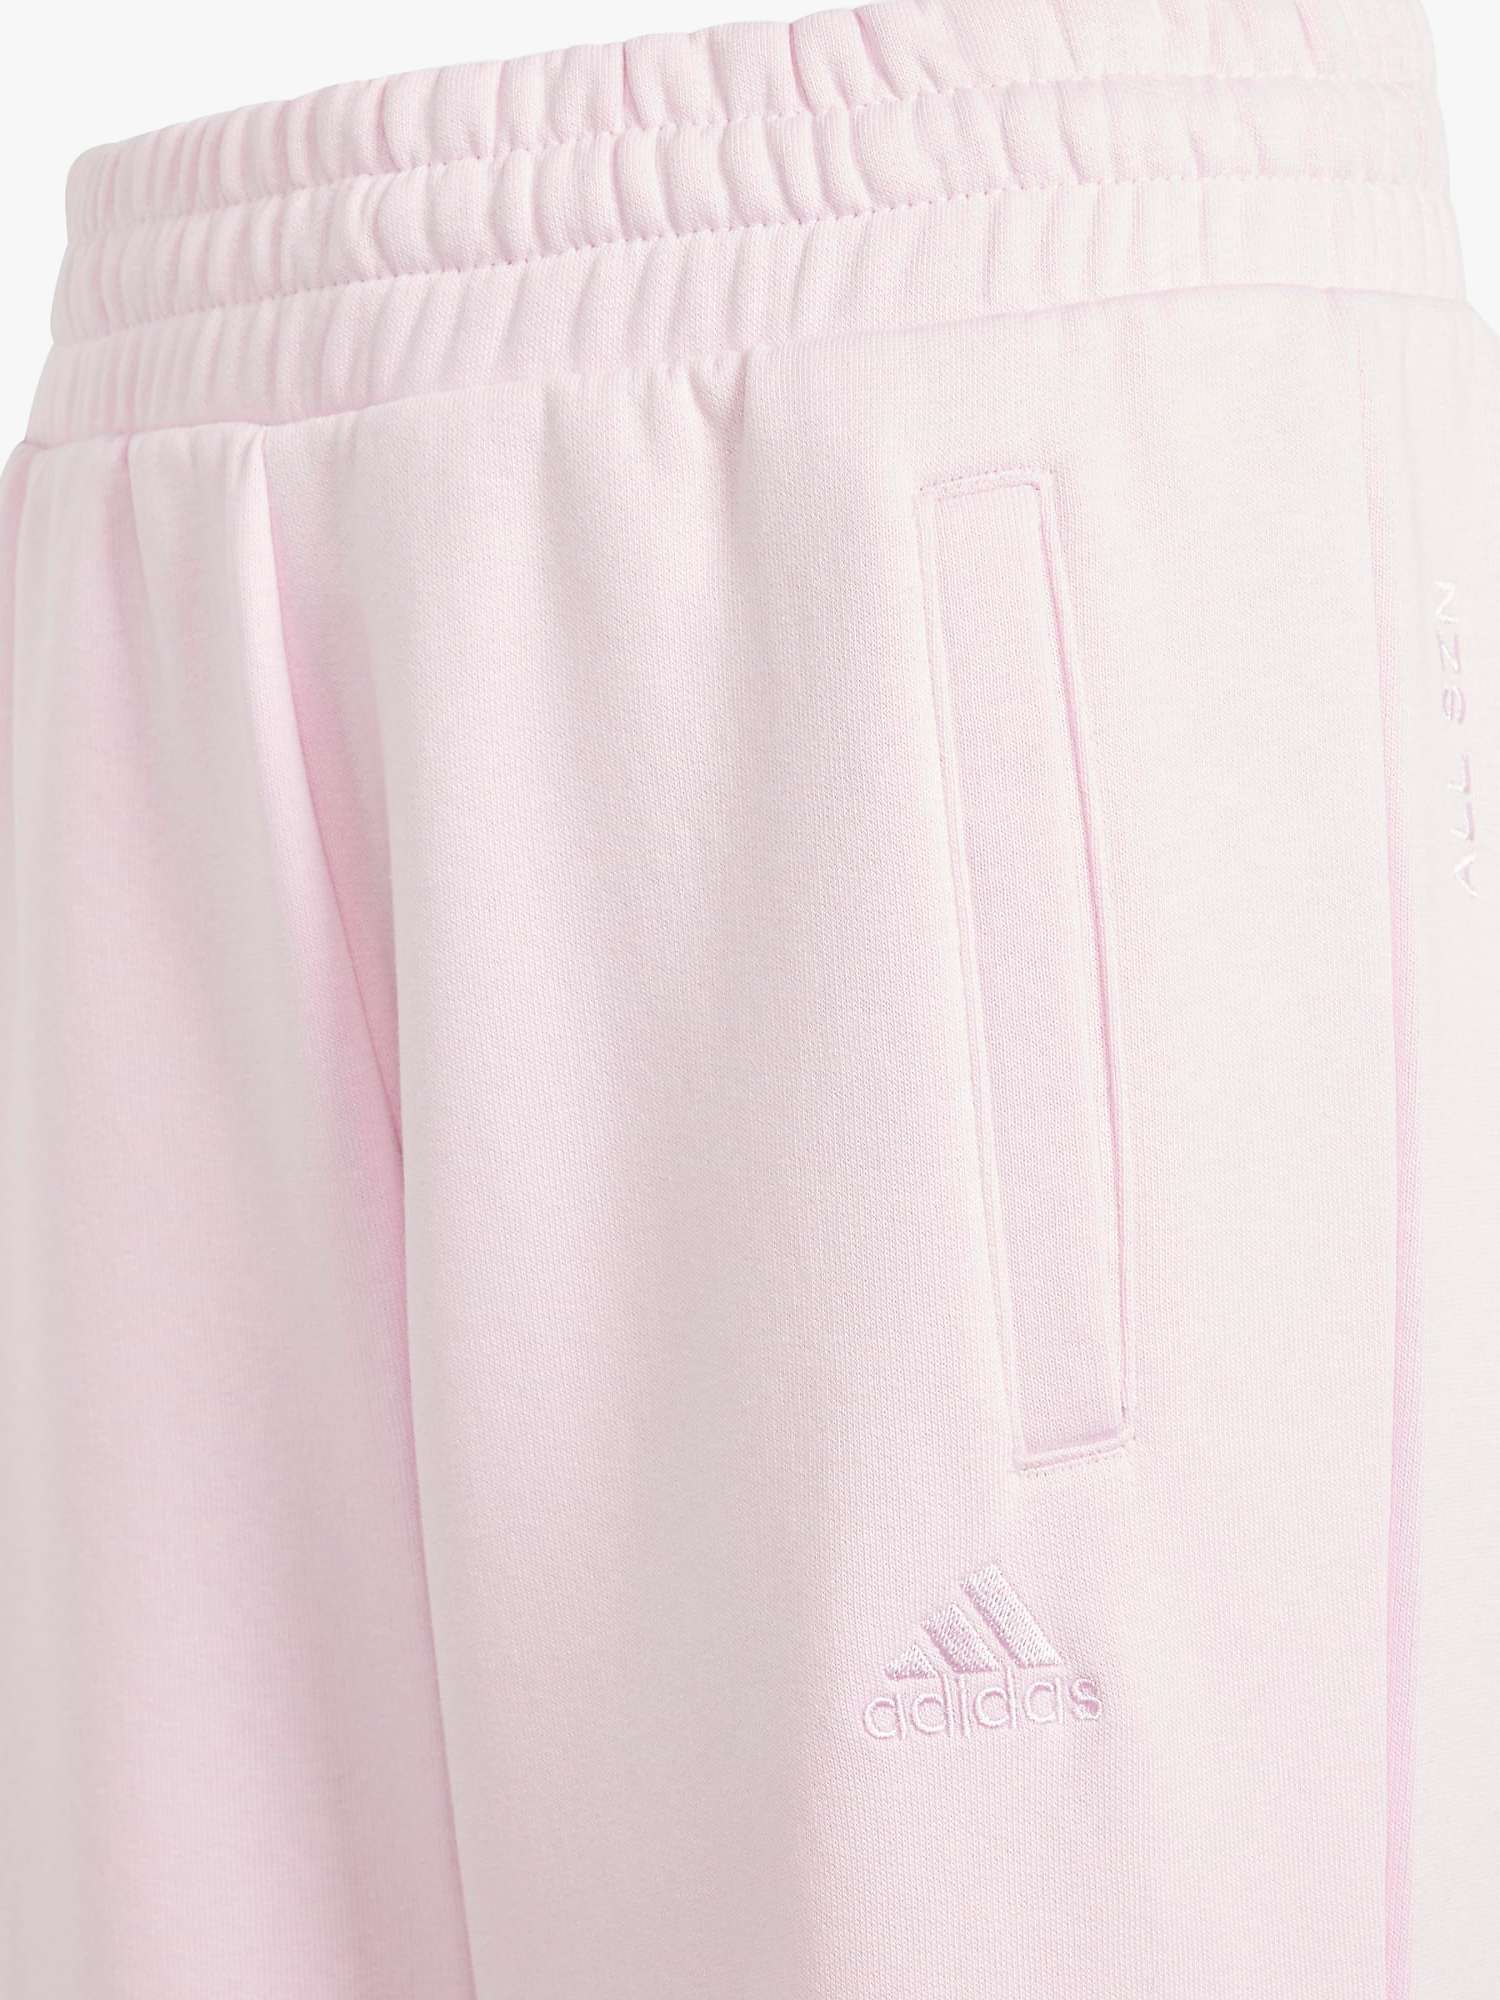 Buy adidas Kids' All SZN Joggers, Pink Online at johnlewis.com